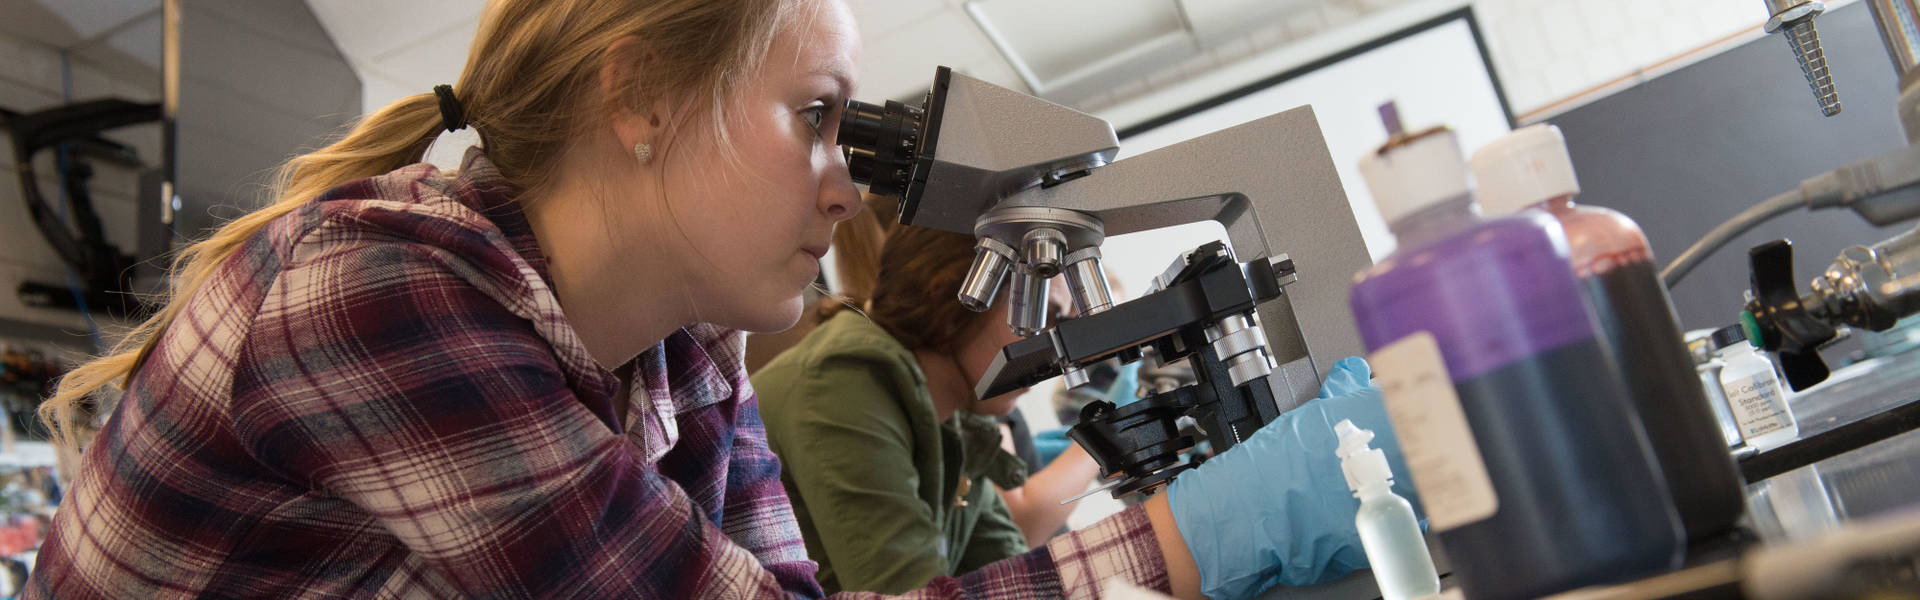 Student working with microscope in environmental health lab class